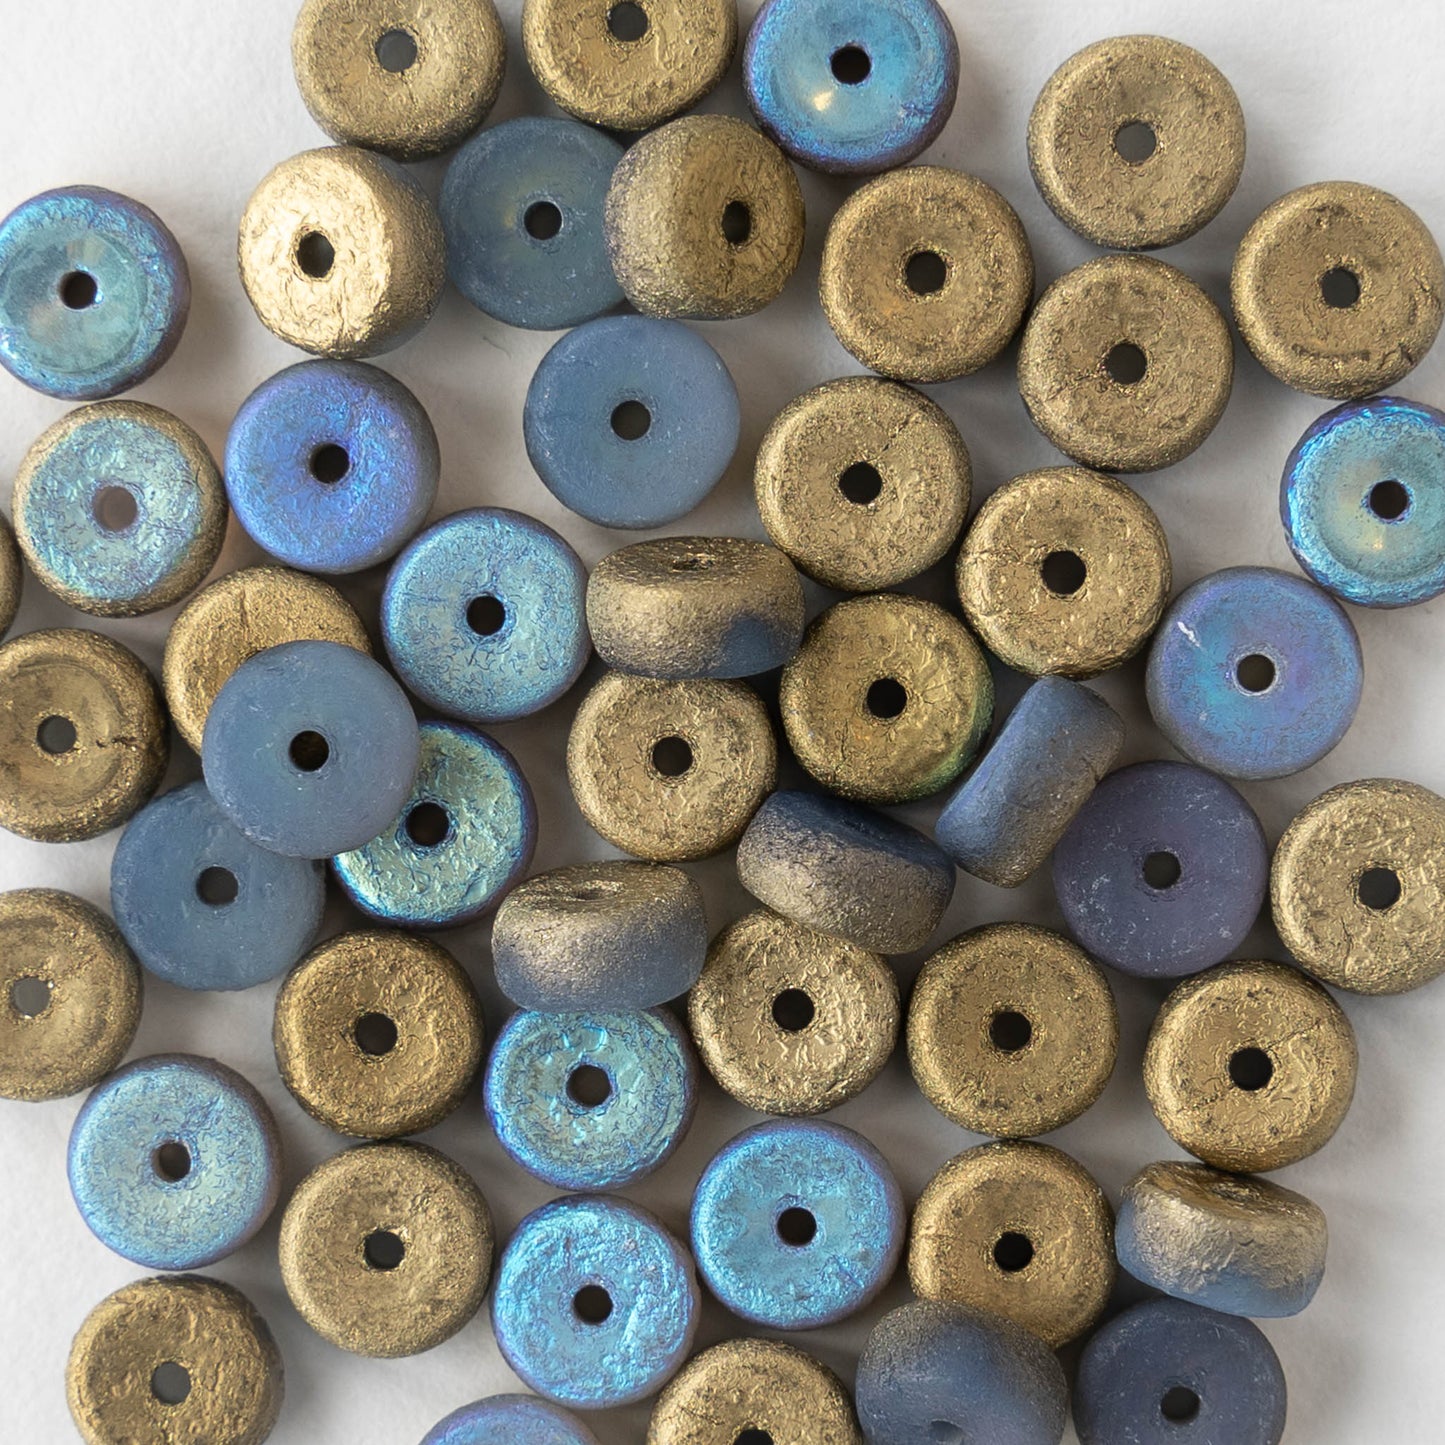 6mm Glass Heishi Beads - Etched Light Blue with Gold - 25 Beads